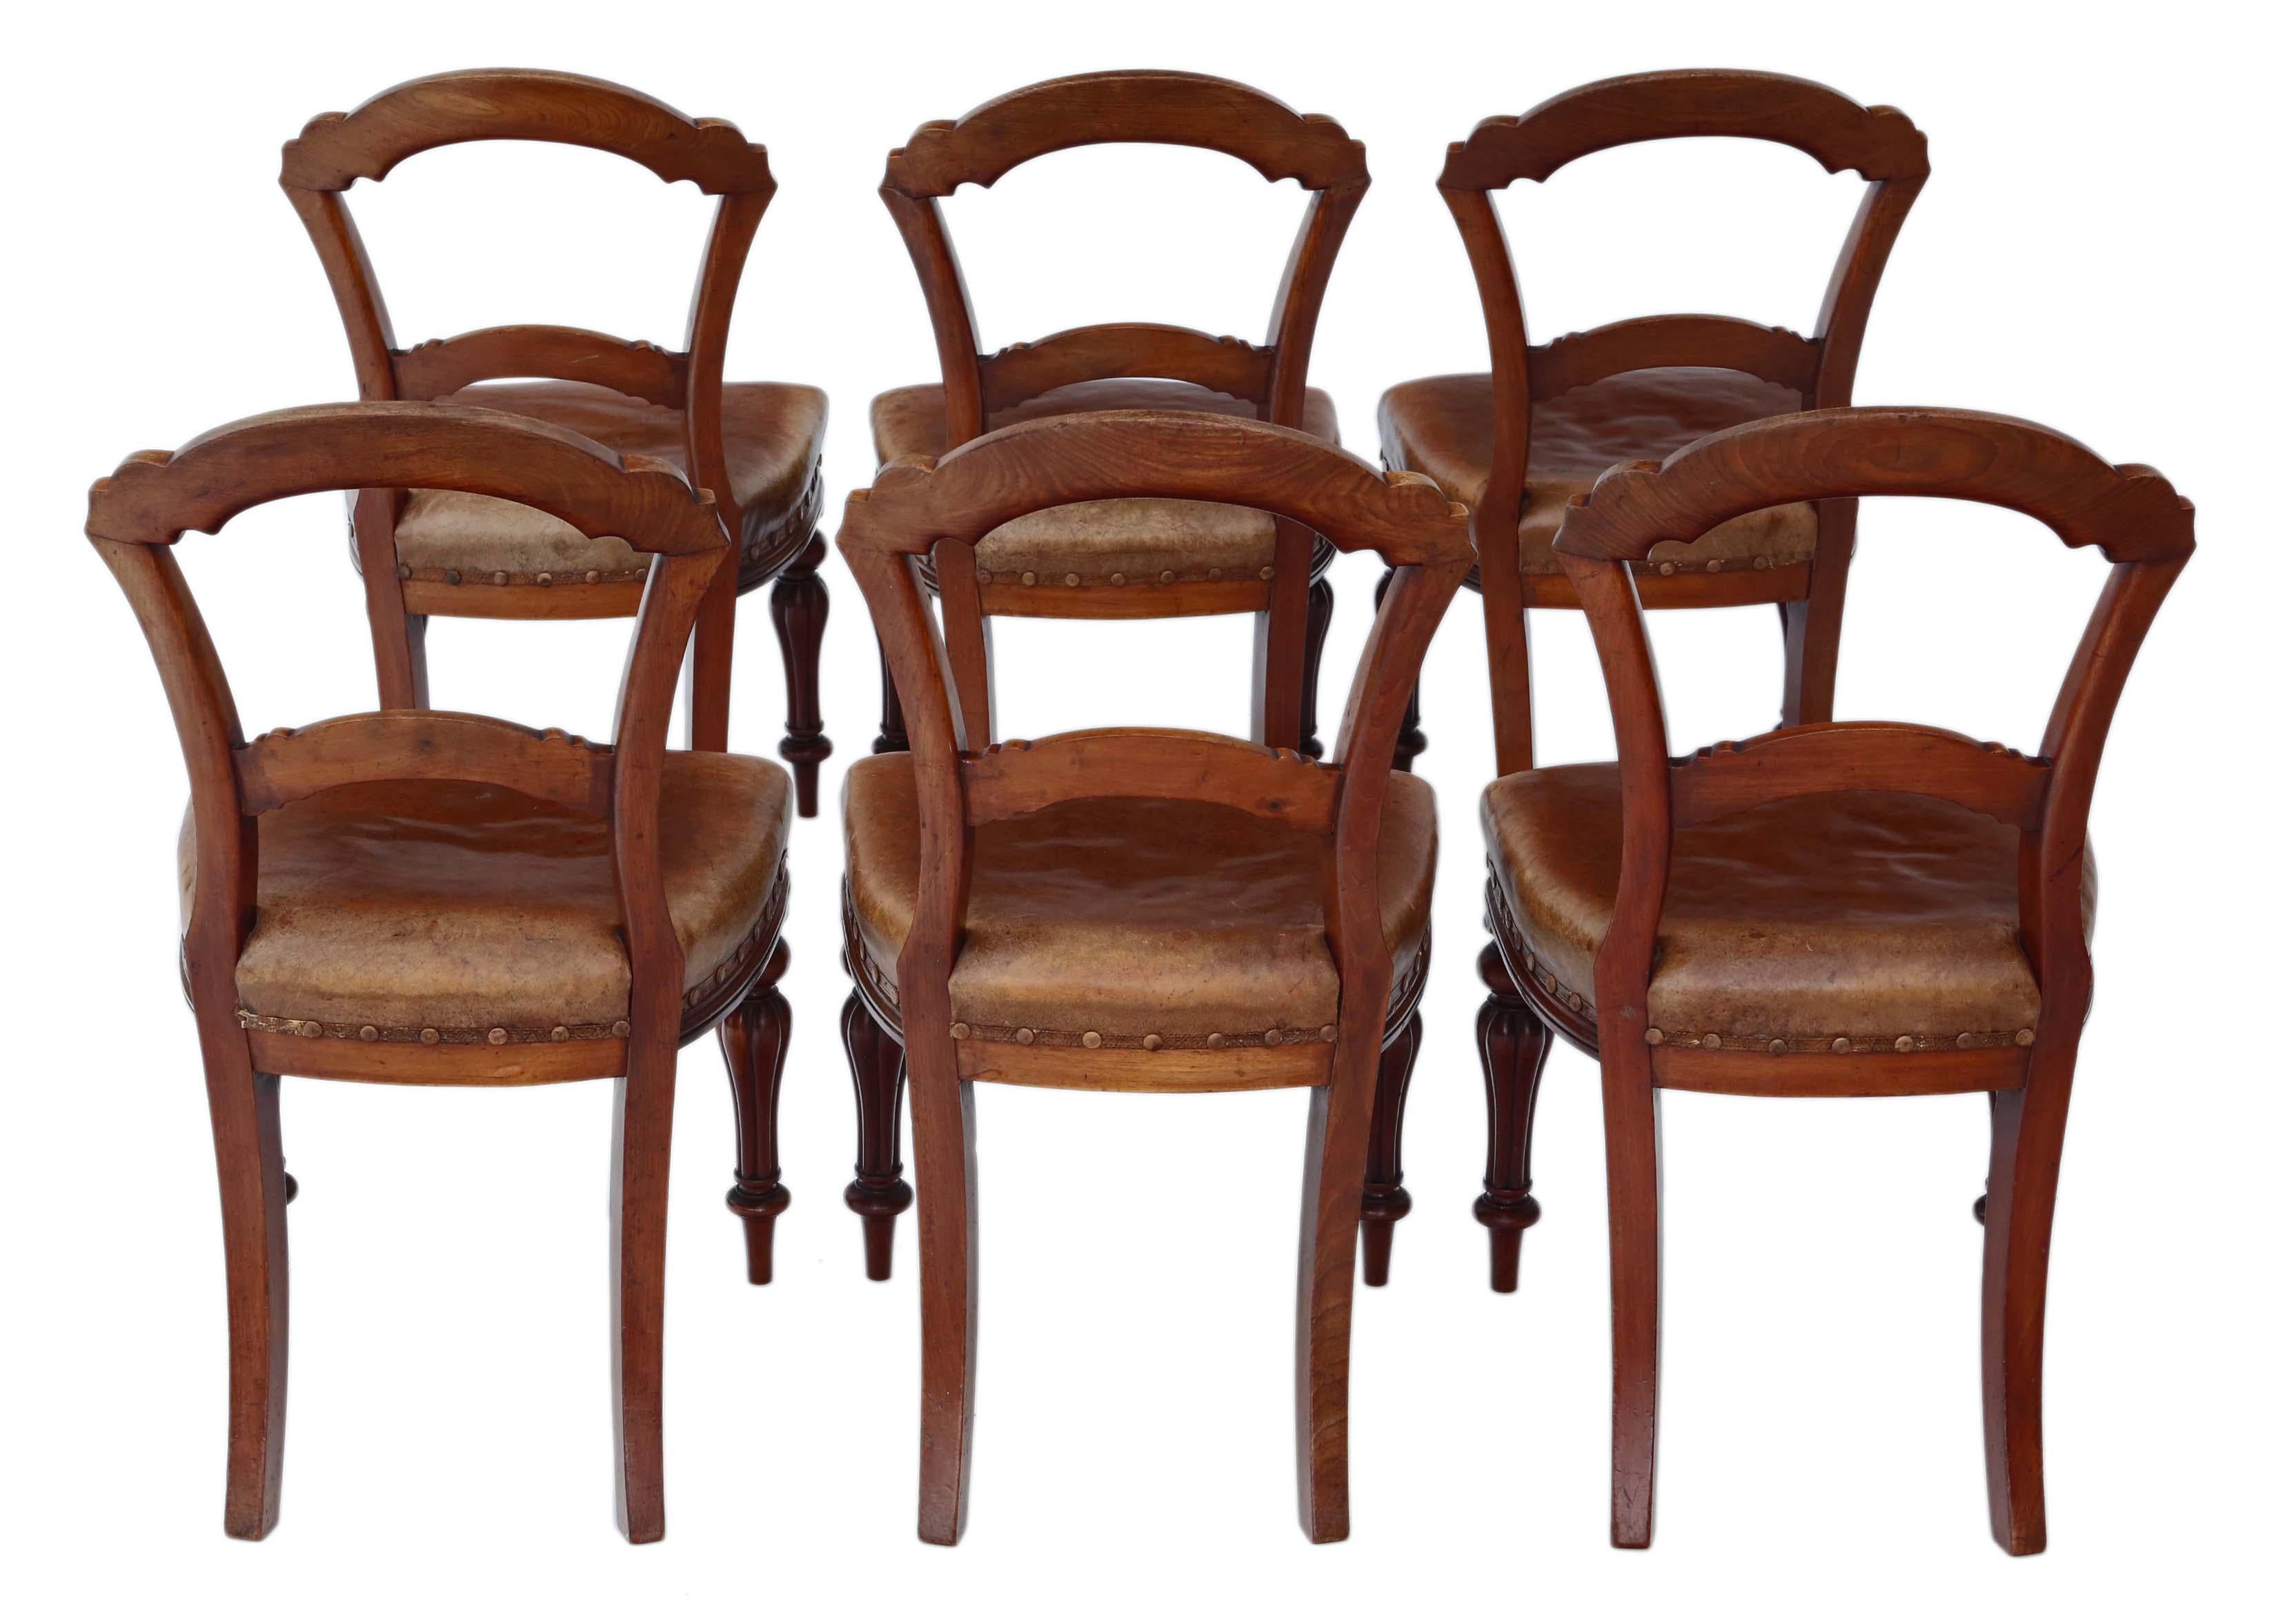 Set of 6 Victorian circa 1880 walnut balloon back dining chairs with leather seats.
Solid, heavy and strong, with no loose joints and no woodworm.
The leather upholstery is old and patinated, but in good order (some minor trim losses).
Would look